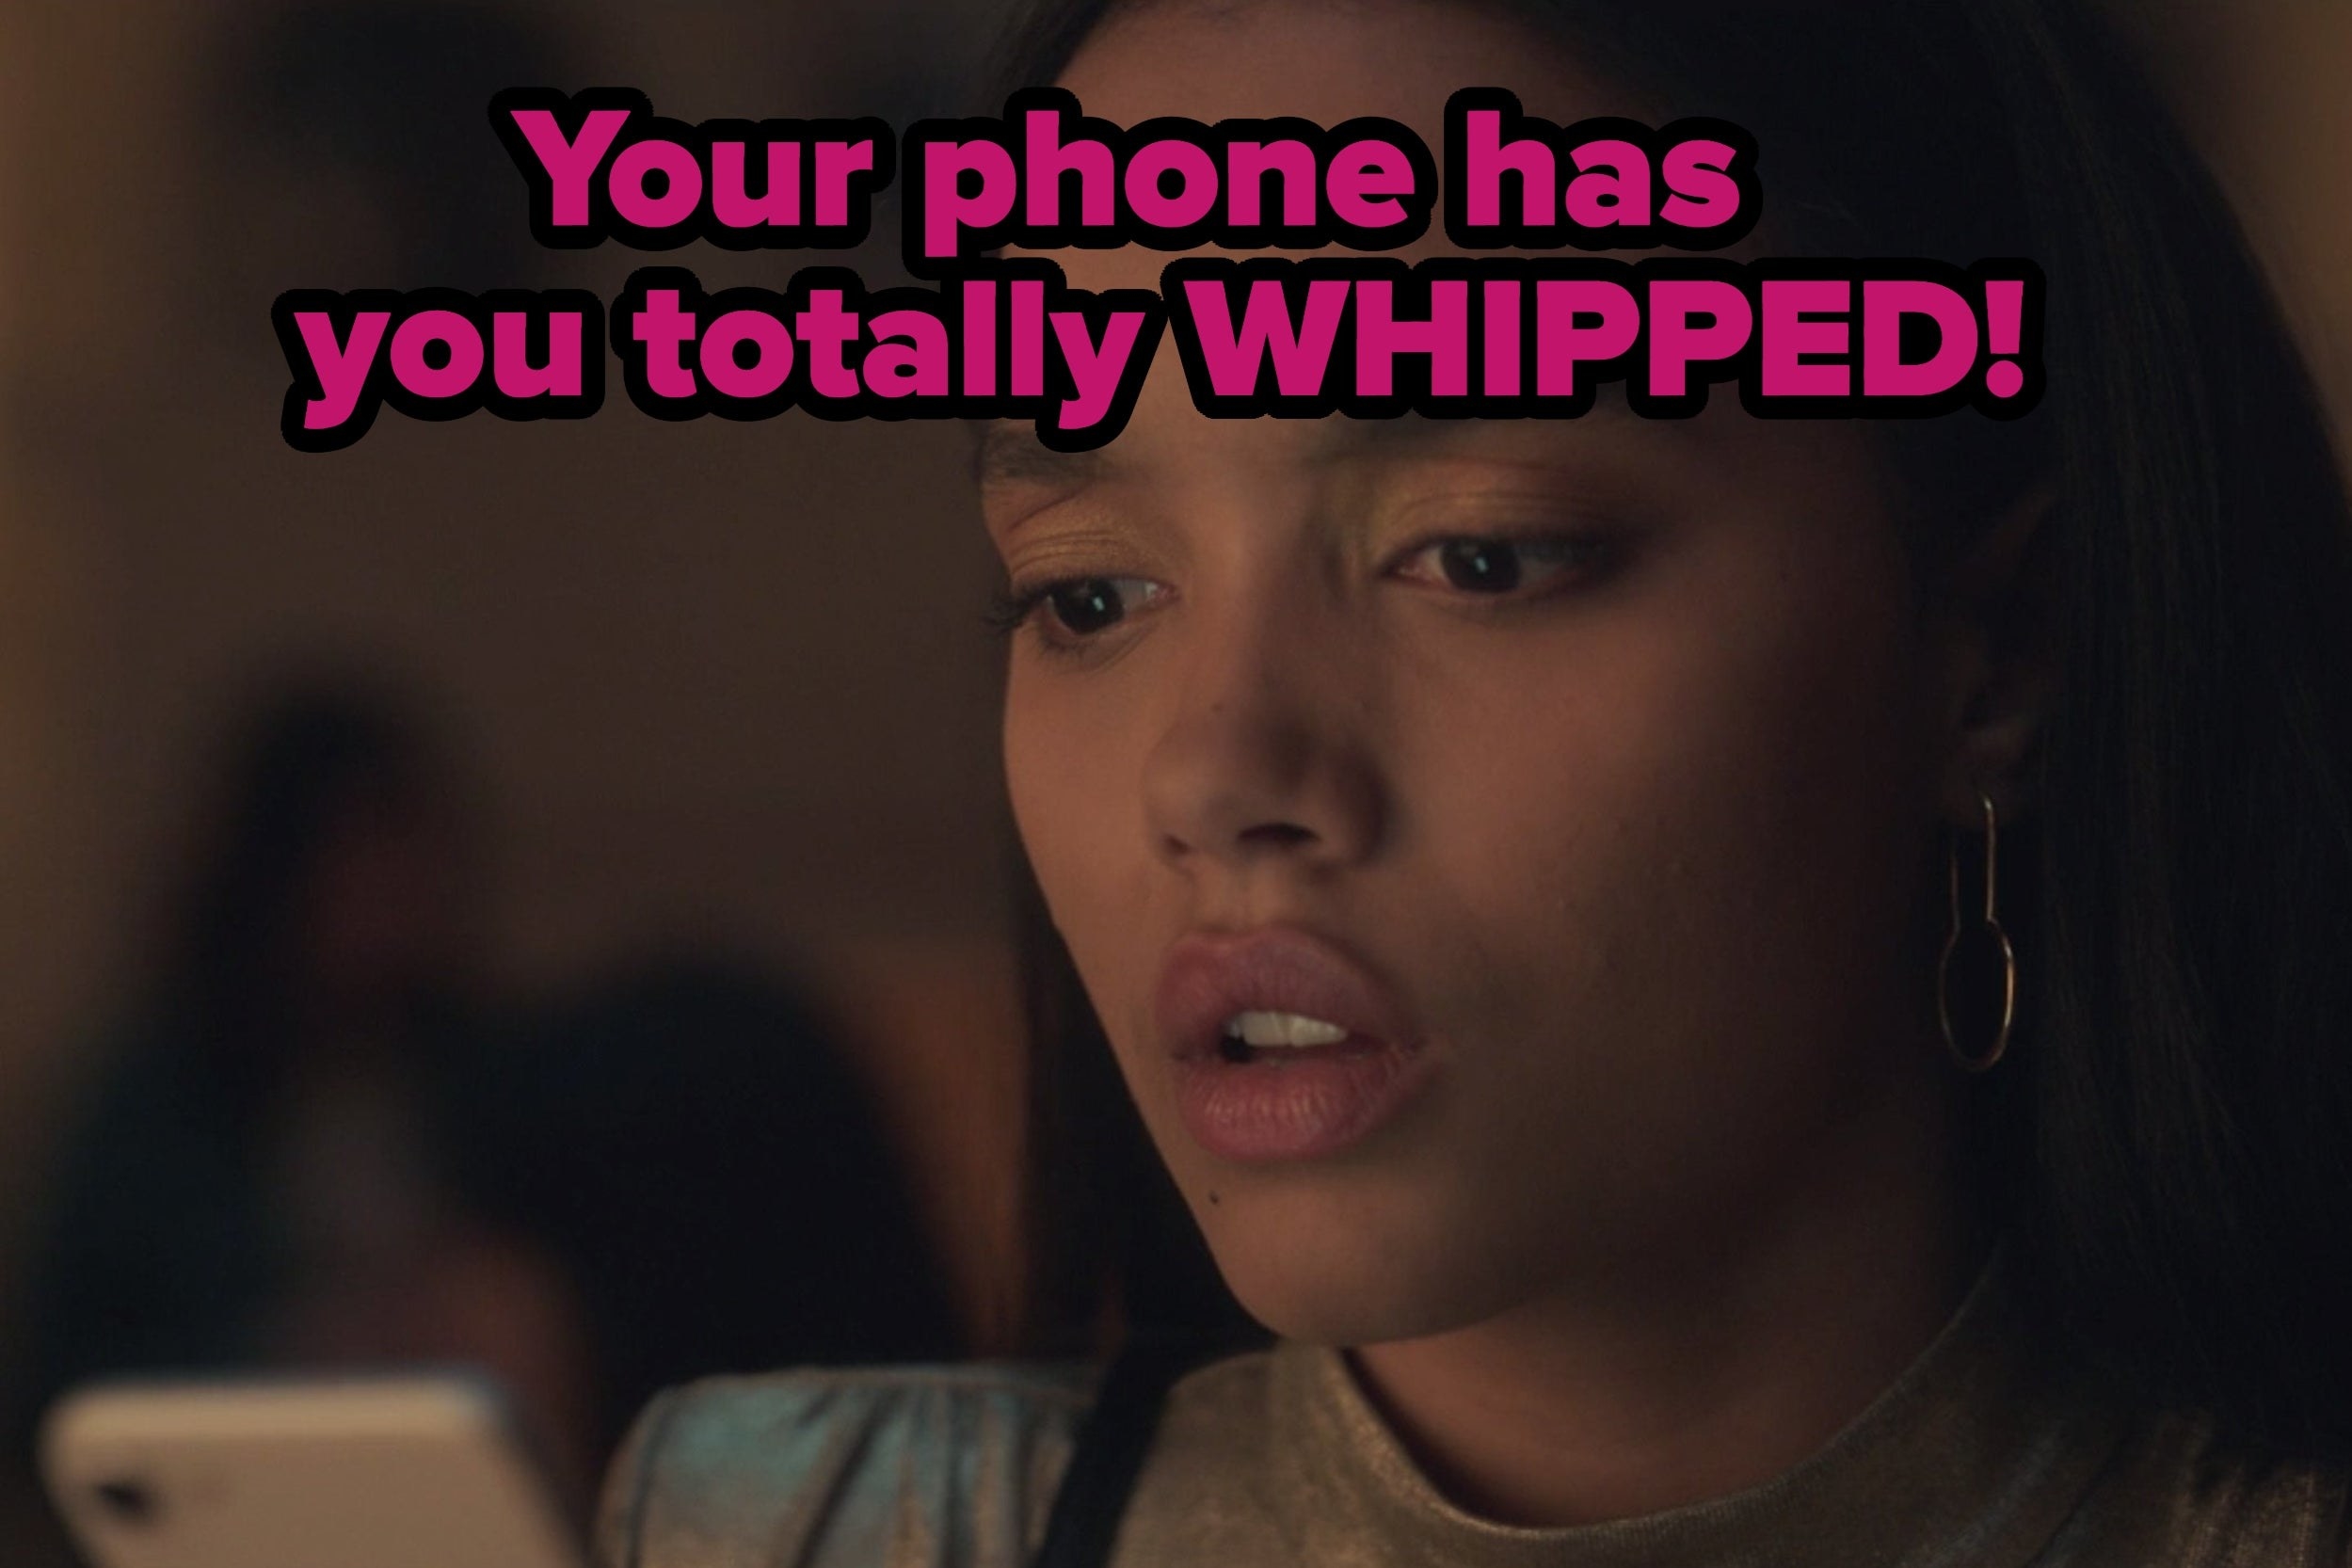 Gossip Girl girl looking at phone and the words: your phone has you totally whipped!